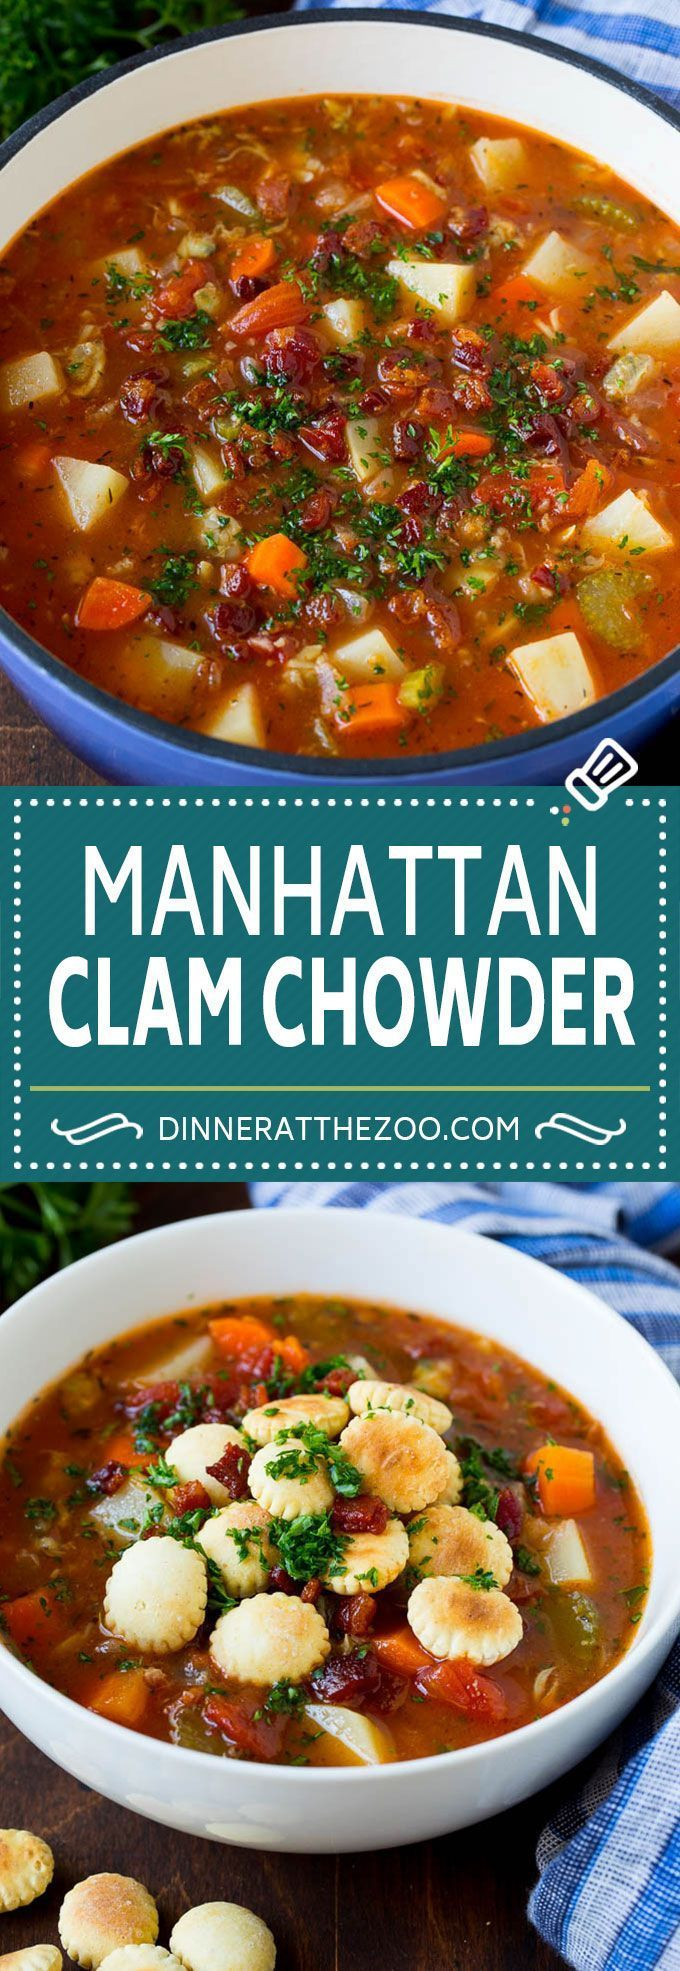 Gourmet Manhattan Clam Chowder Recipe
 Manhattan clam chowder with bacon potatoes and ve ables